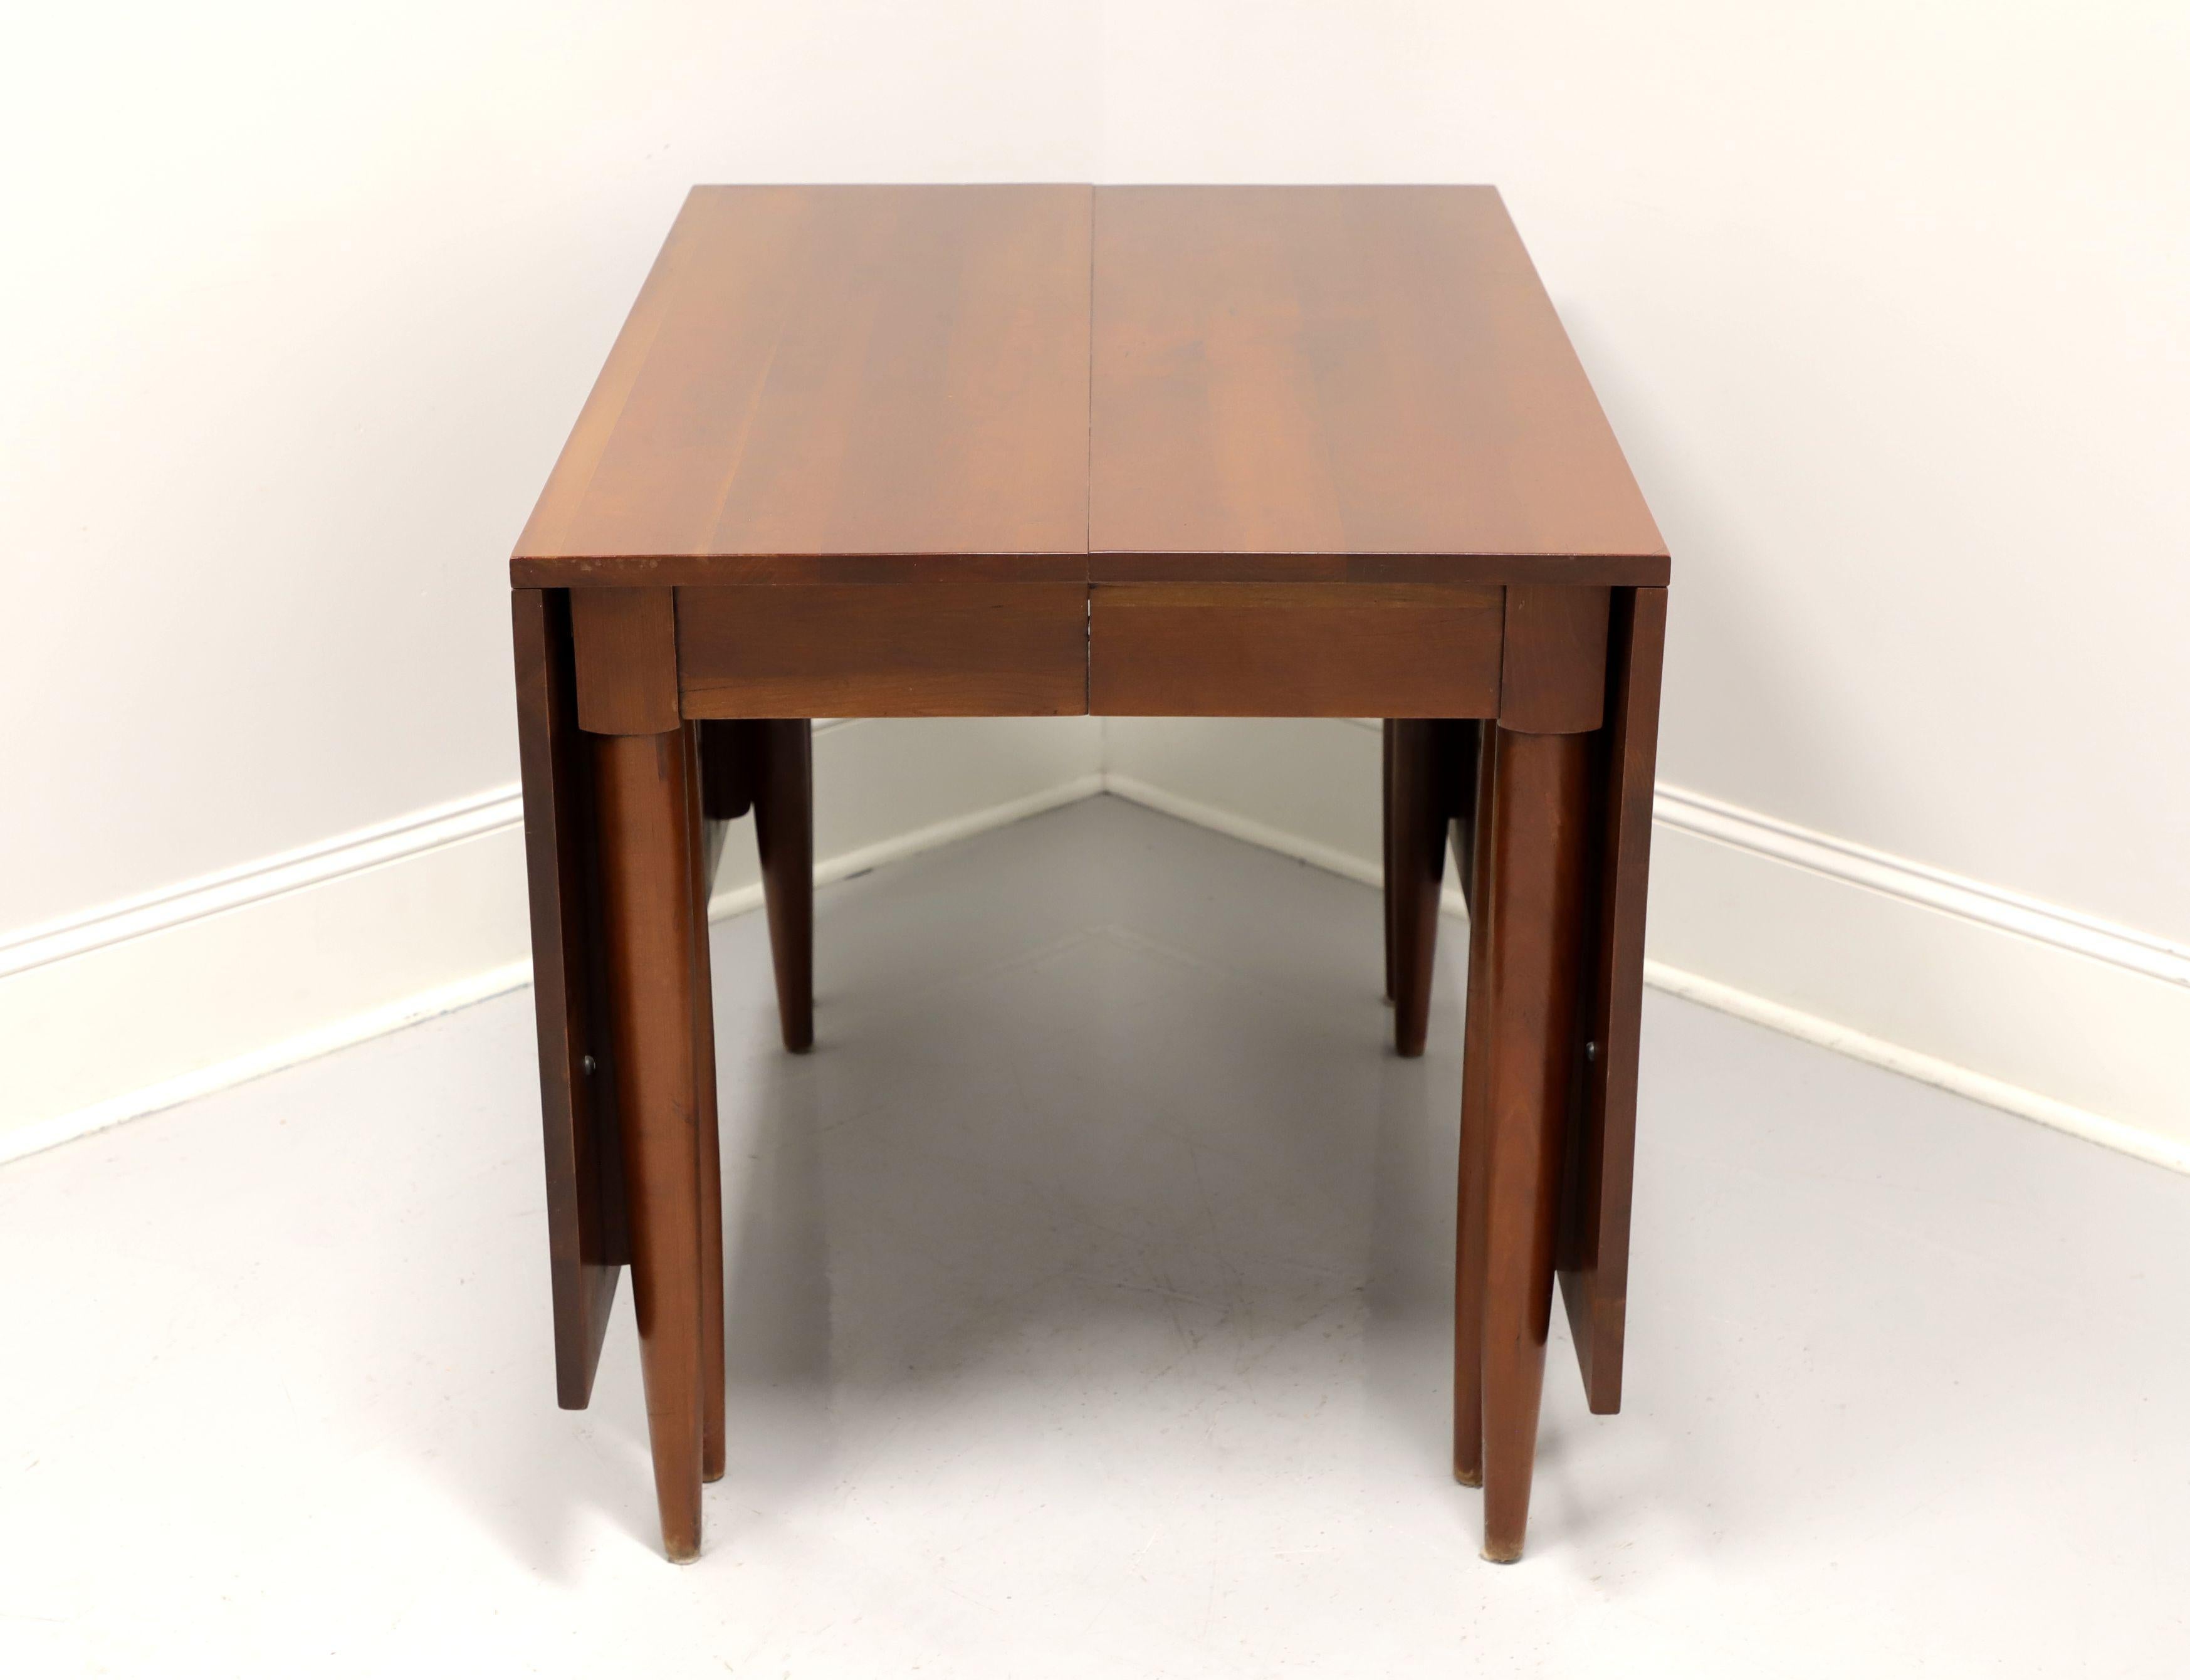 A gateleg drop leaf dining table by Willett Furniture, of Louisville, Kentucky, USA. Solid cherry, a center apron, wood expansion sliders and eight round tapered legs, four being gateleg that swing out to support the drop leaves when raised. Inludes